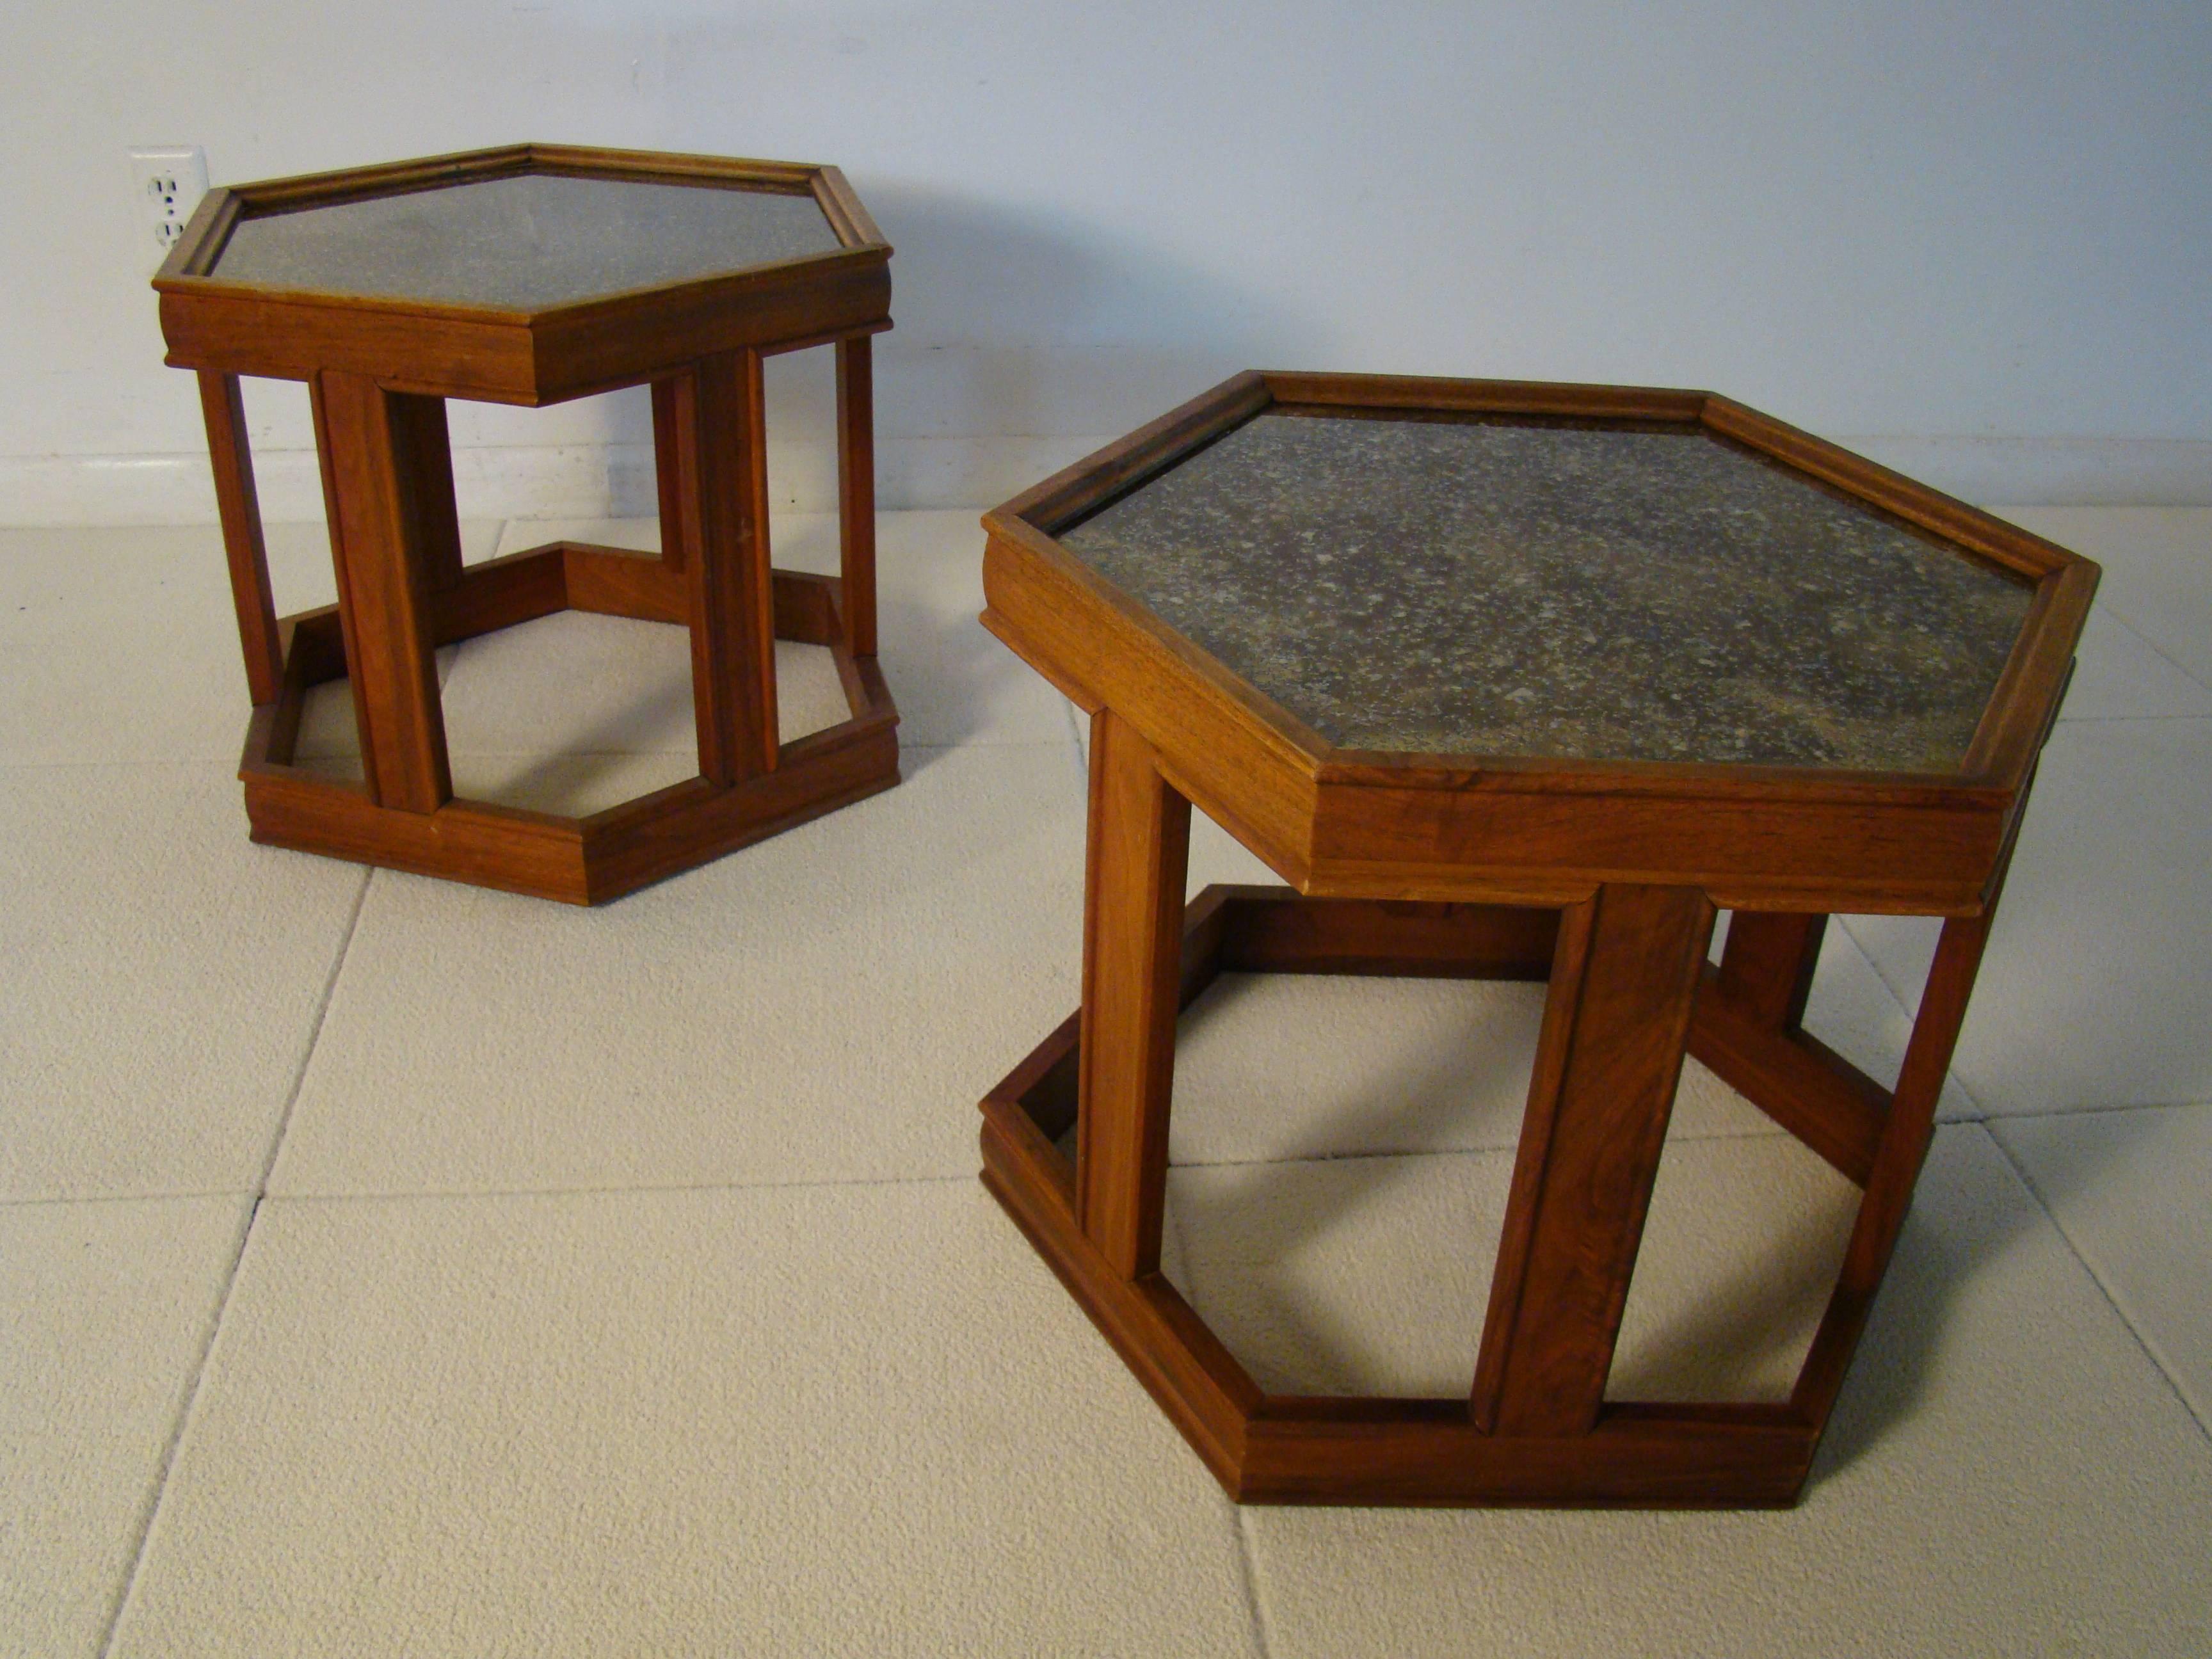 Beautiful set of John Keal walnut and reverse painted hexagonal architectural tables. Retains original paper label on the underside.